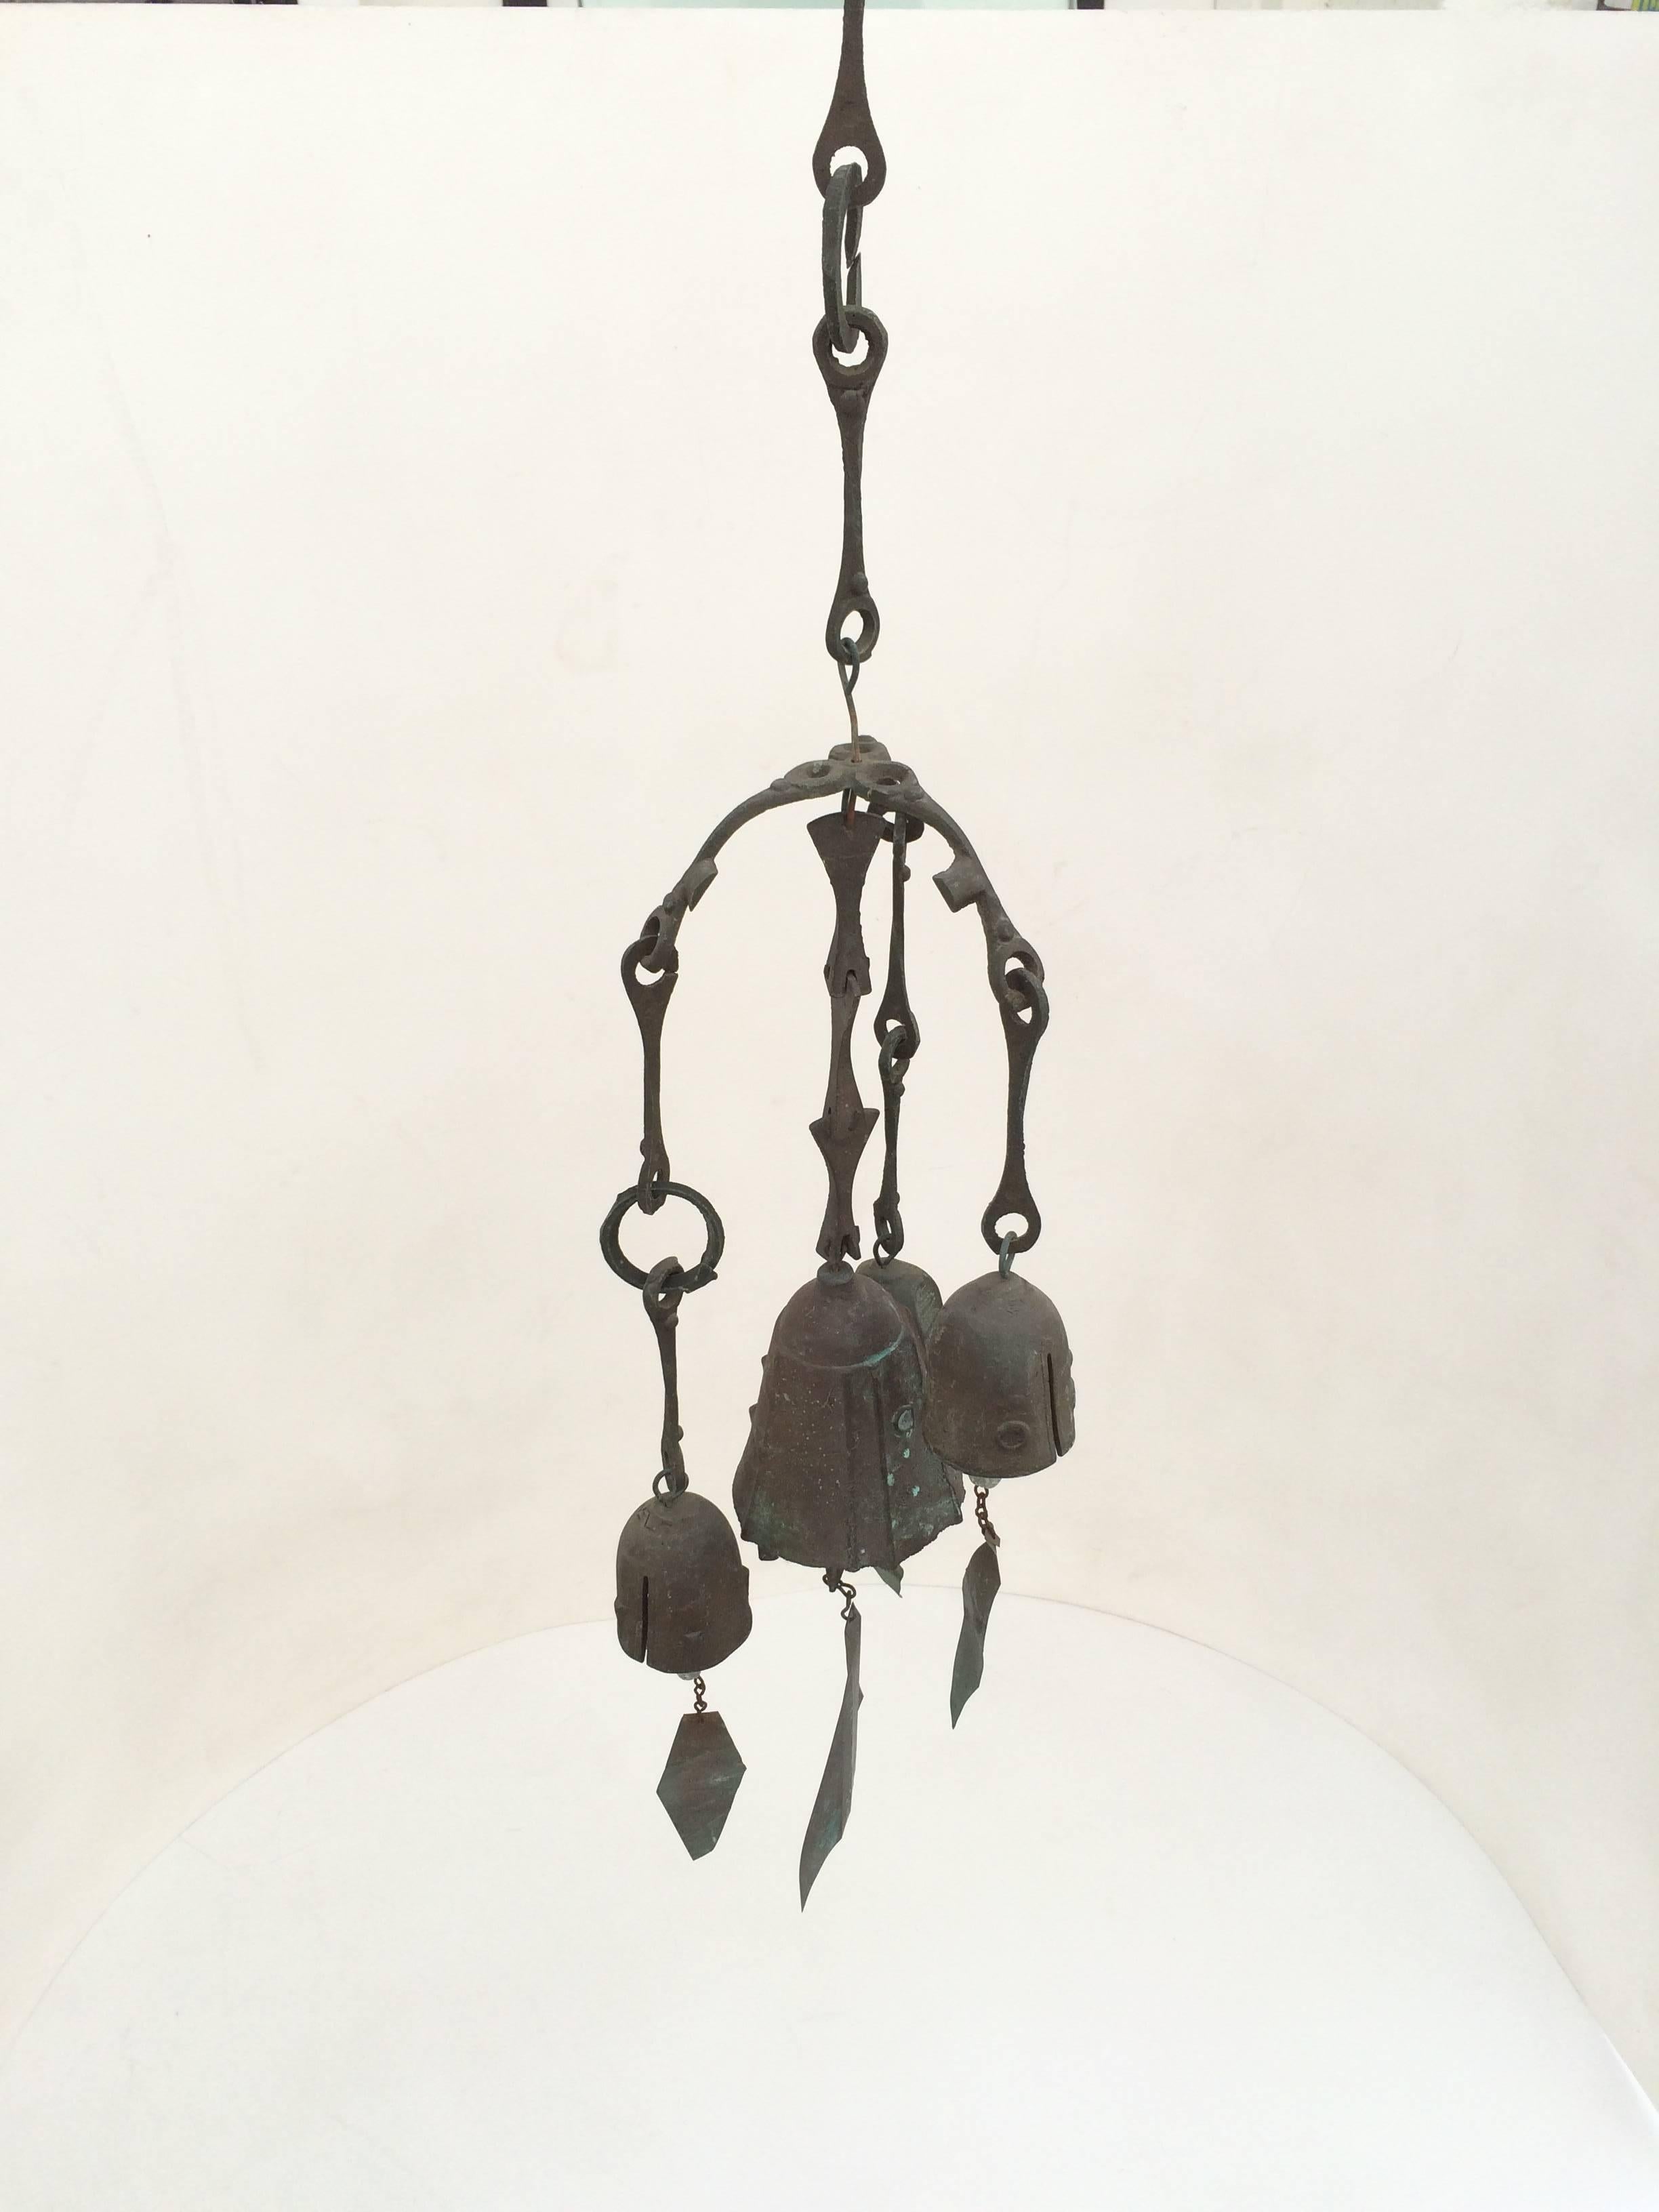 Multiple beautifully patina bronze wind bells that hang together by Paolo Soleri.
Consist of three smaller bells that are the same size and one large bell all hanging together that create a unique sound.
Larger bell retains the Soleri signature.